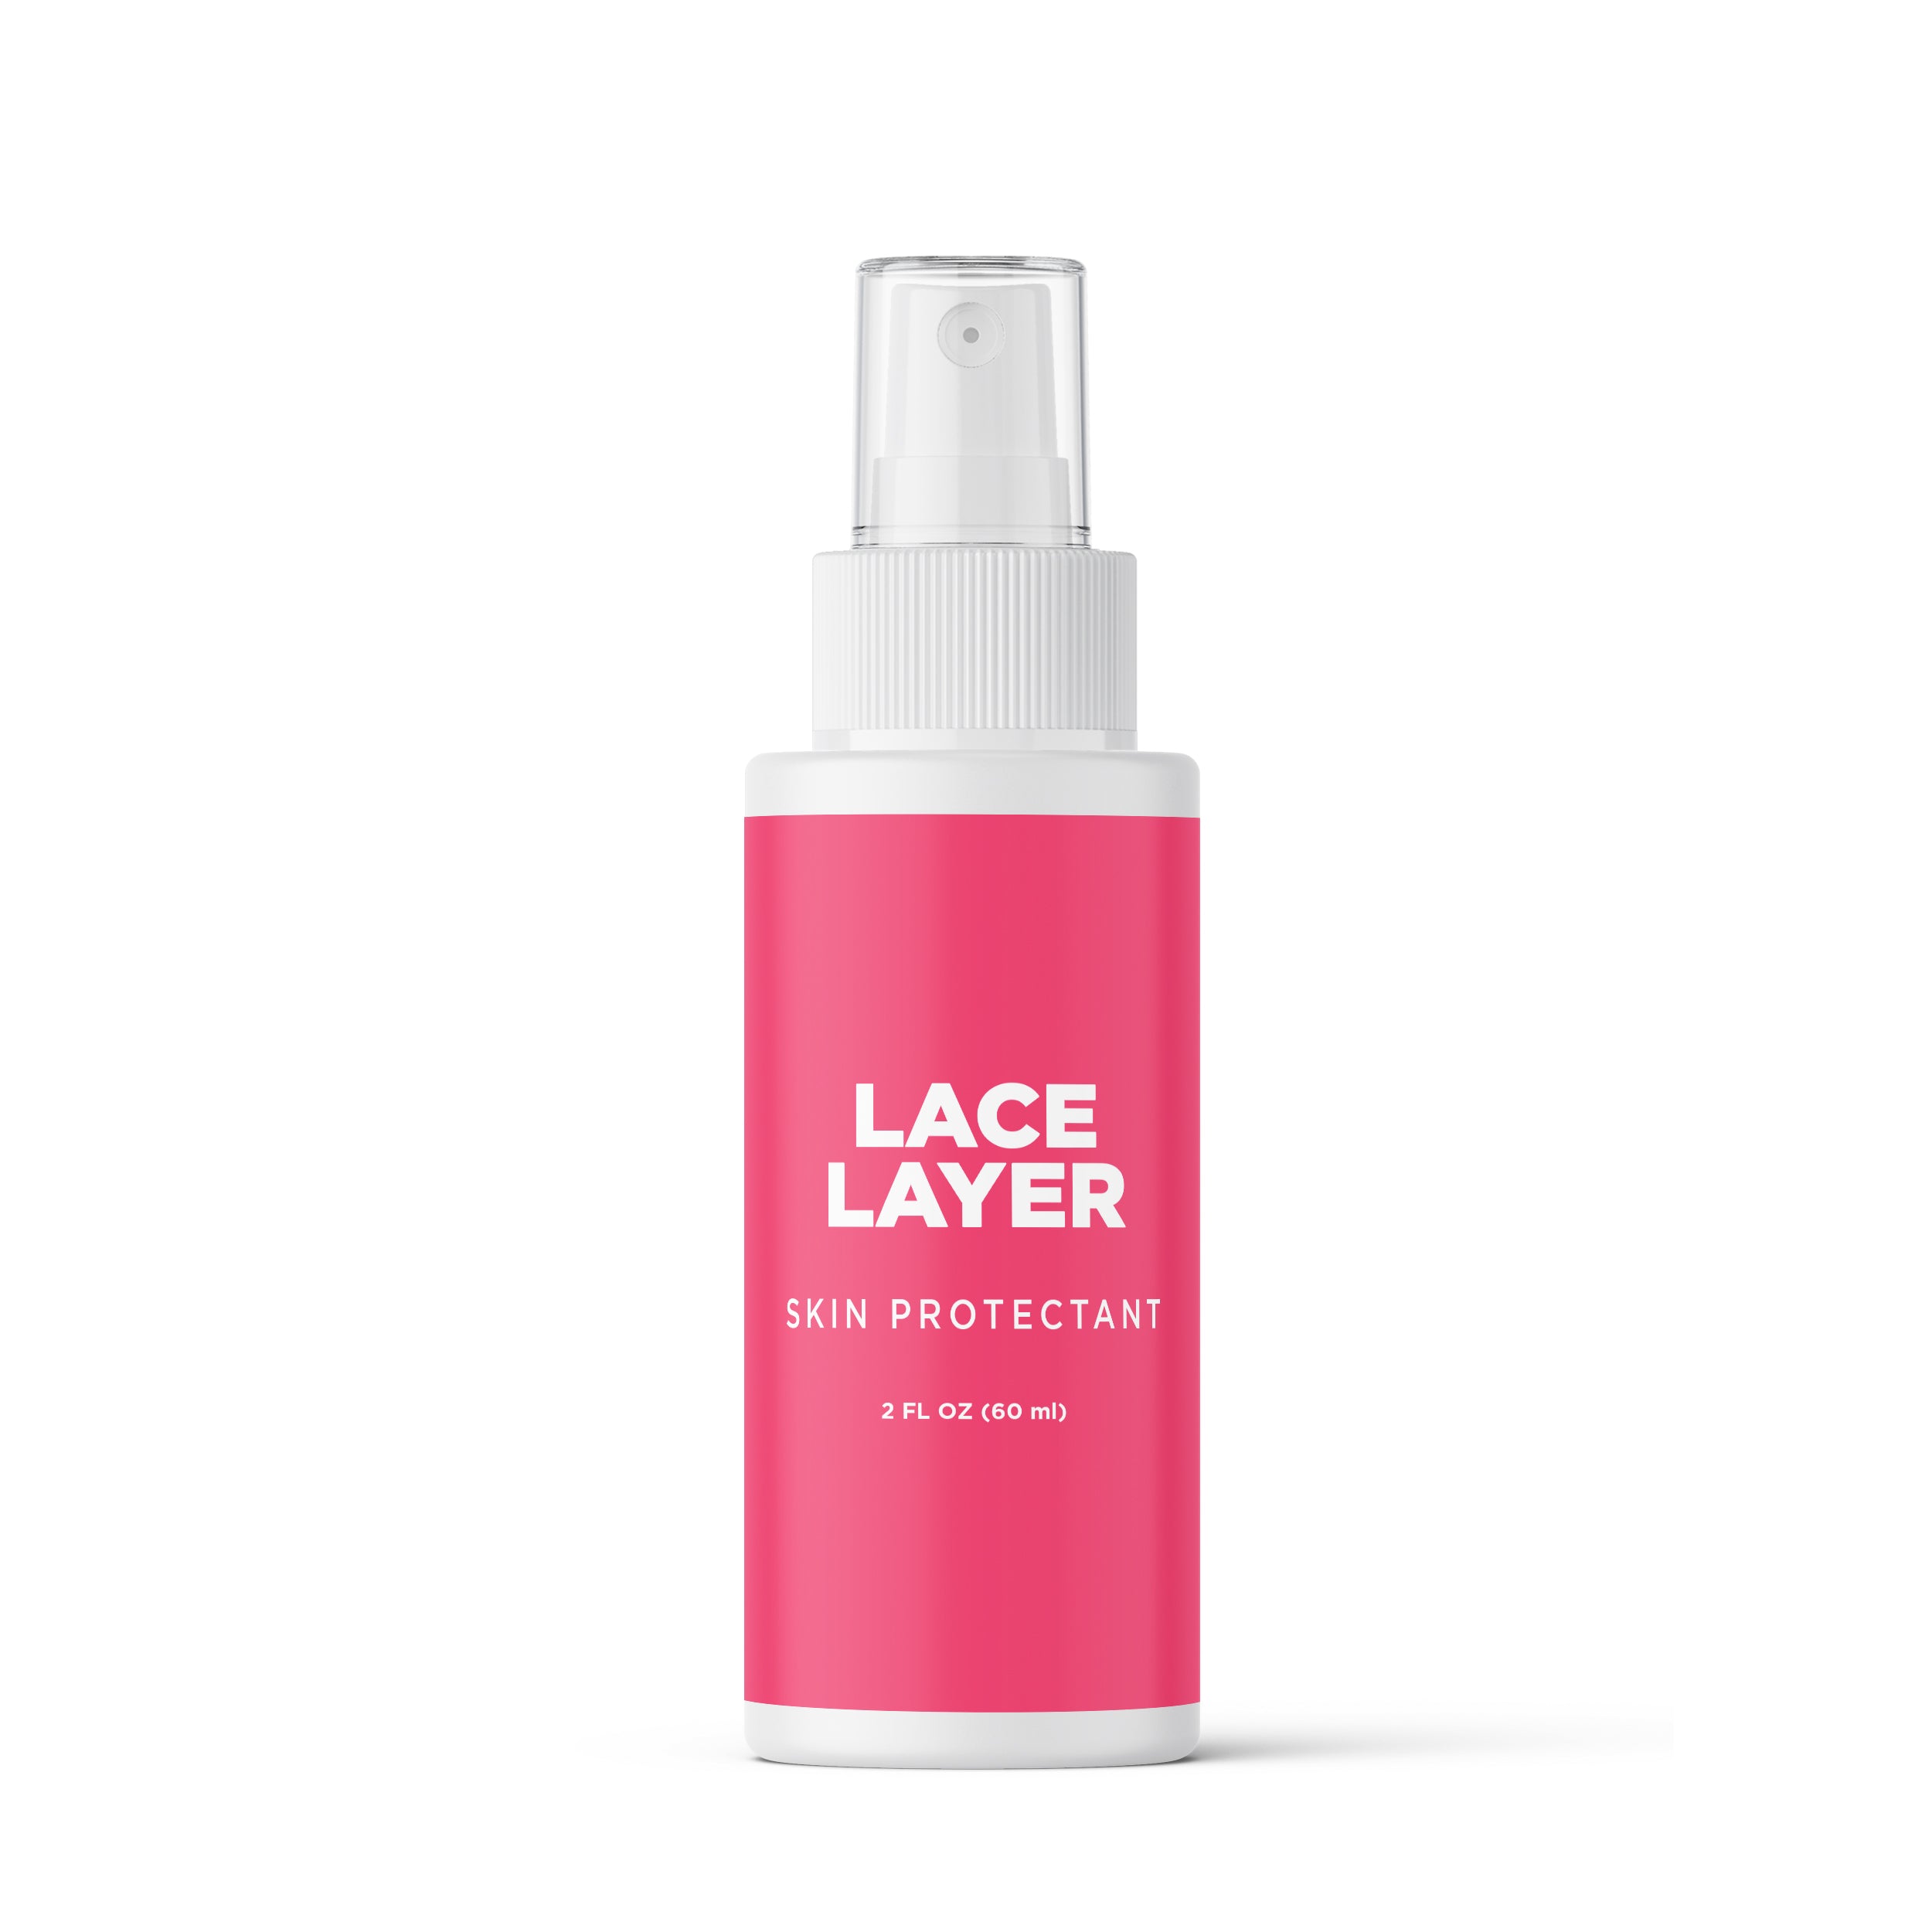 Lace Layer Skin Protectant